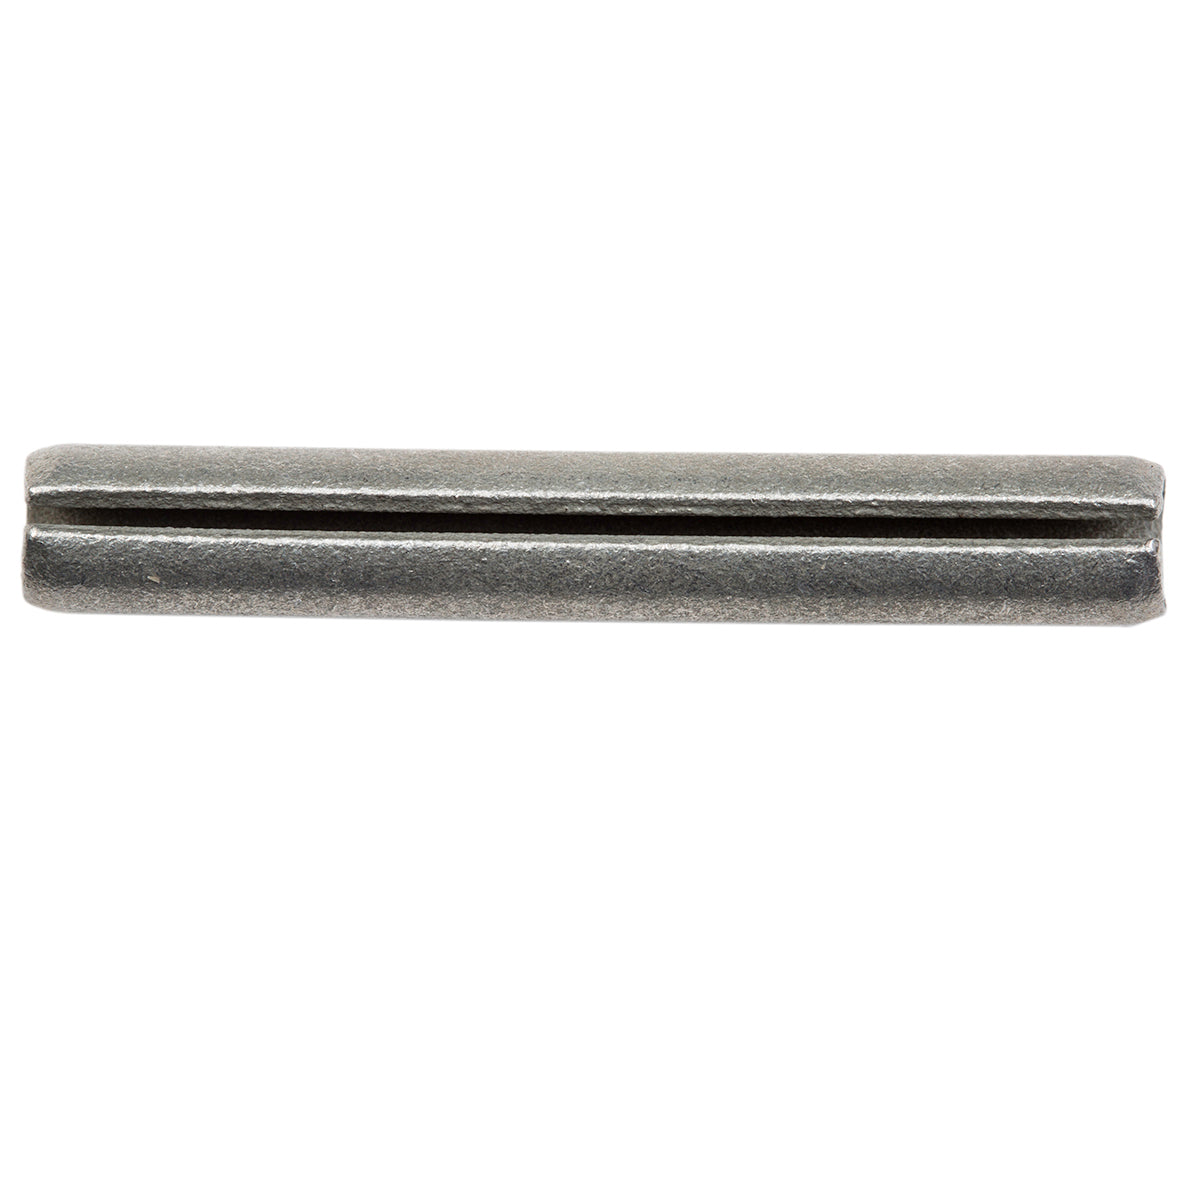 John Deere Slotted Spring Pin For Use On Many Models of Riding Lawn Equipment and Implements